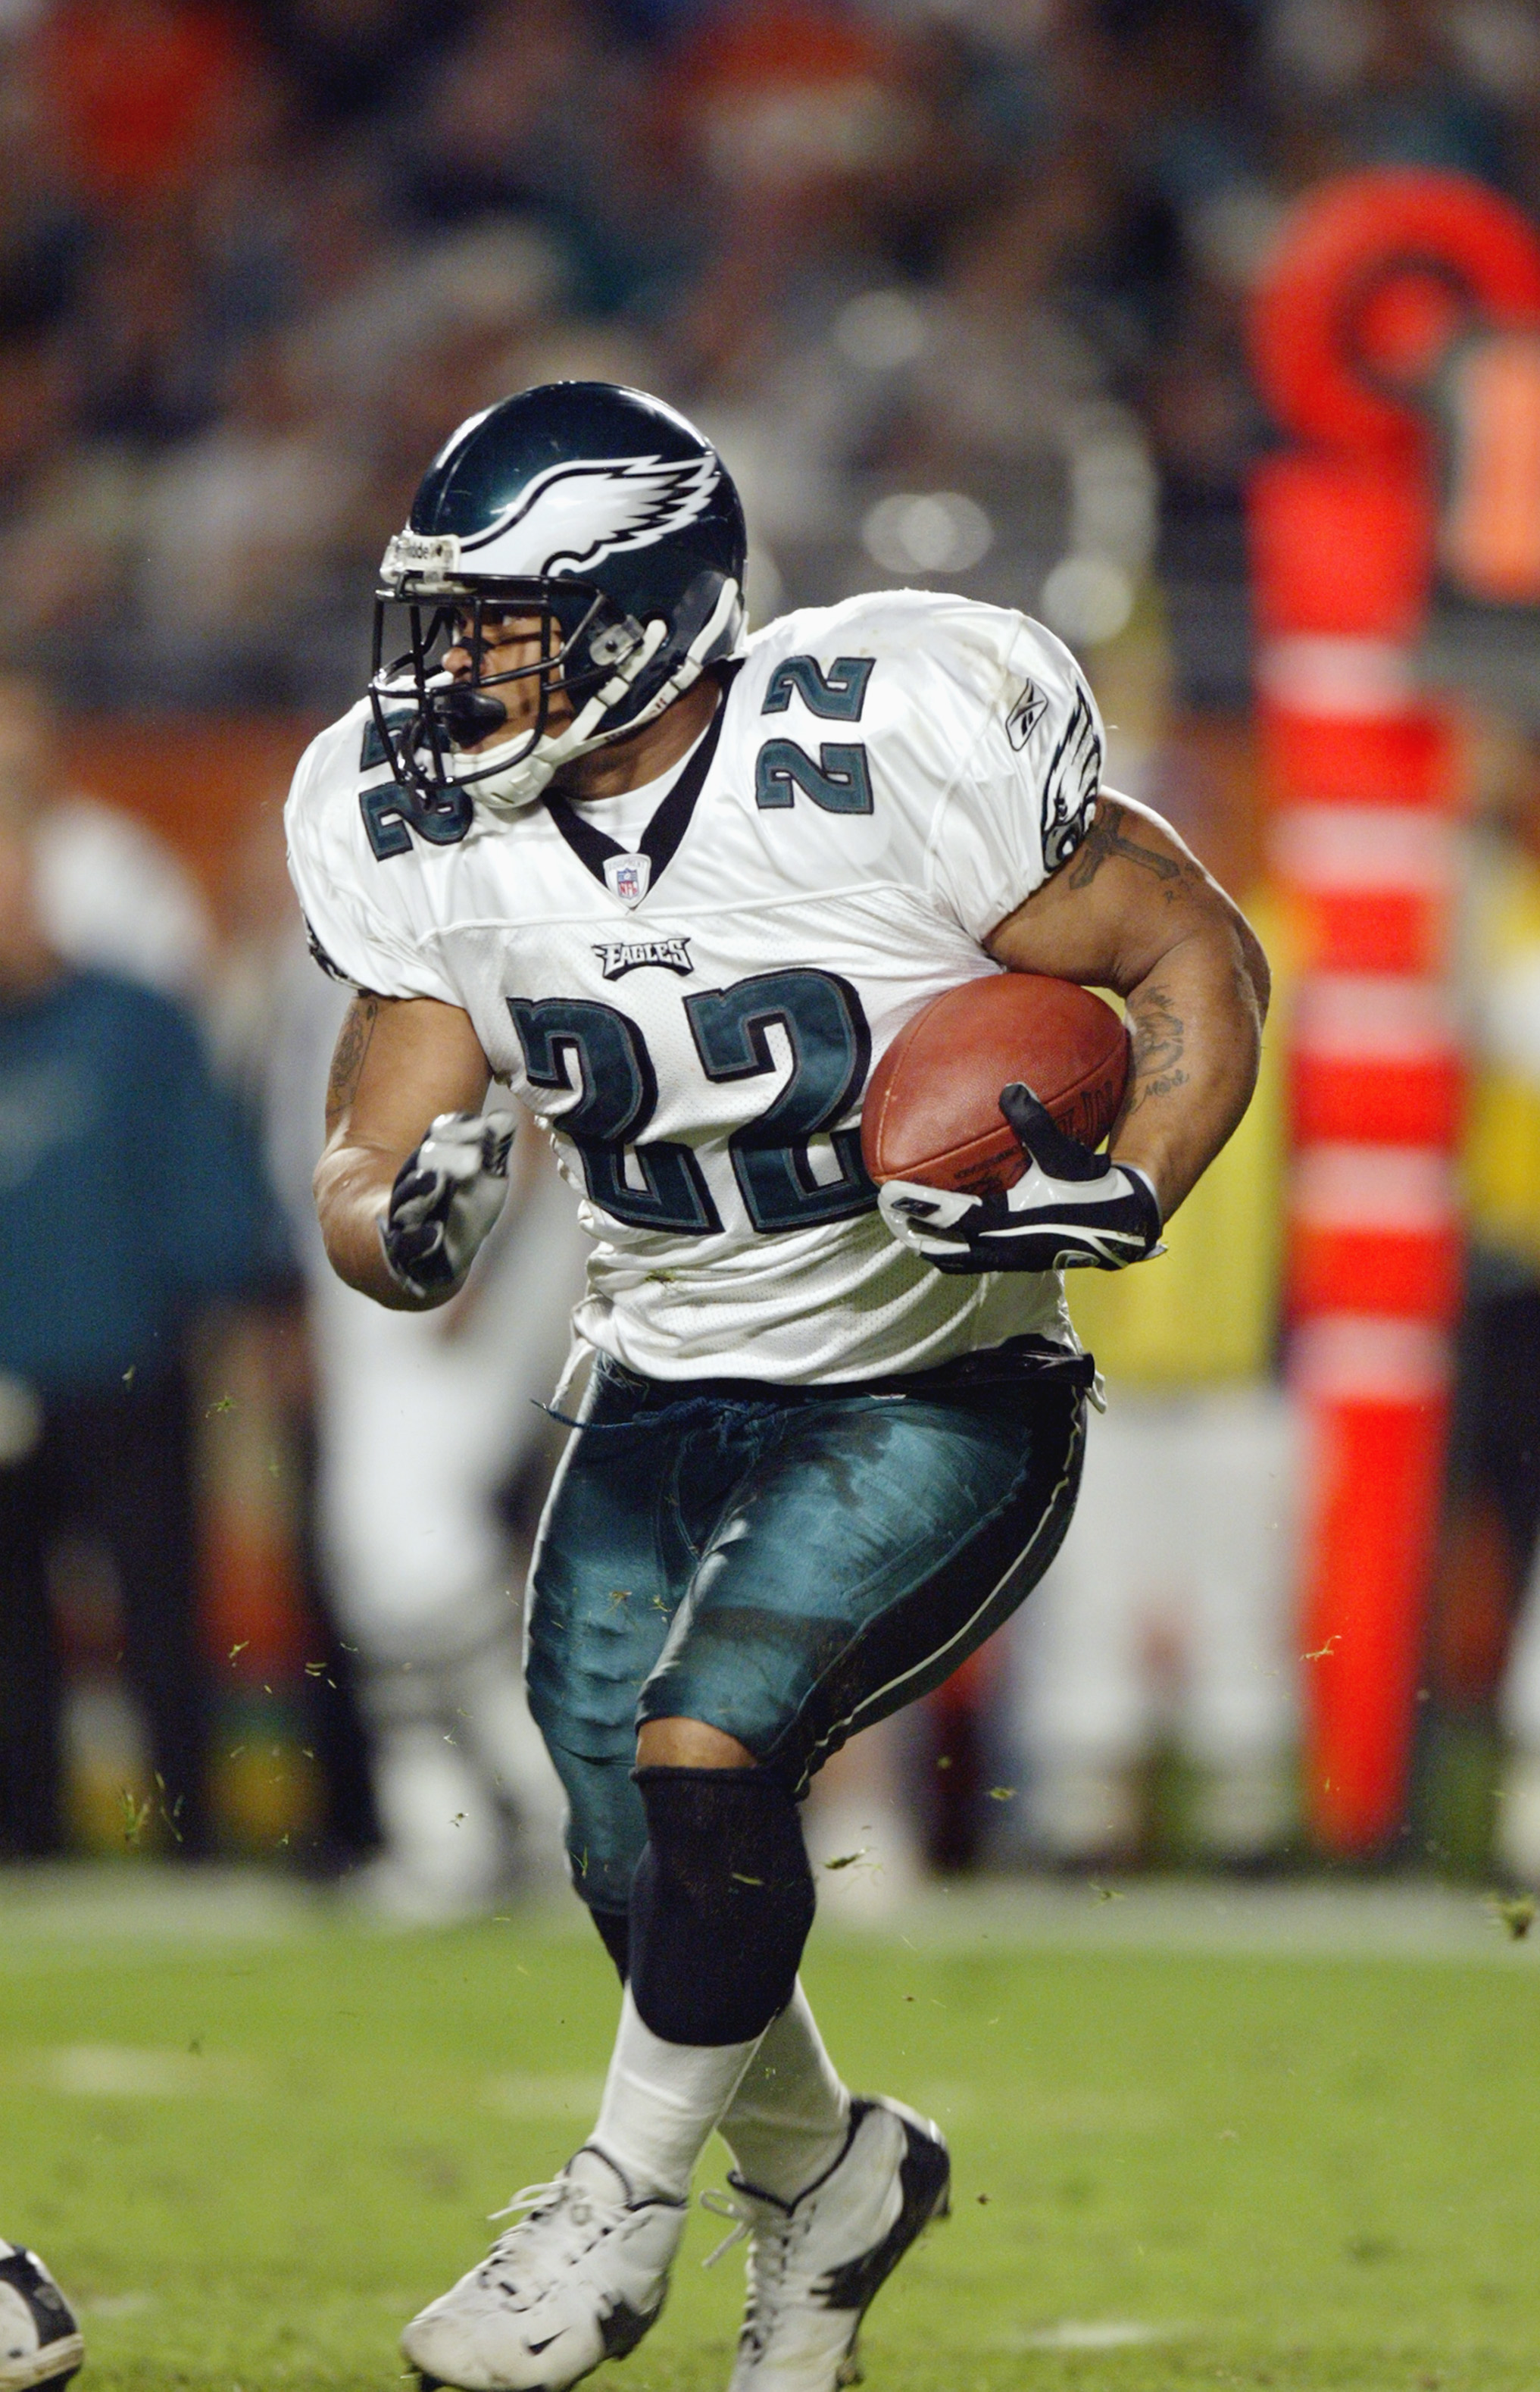 MIAMI - DECEMBER 15:  Running back Duce Staley #22 of the Philadelphia Eagles runs for a first down against the Miami Dolphins on December 15, 2003 at Pro Player Stadium in Miami, Florida.  The Eagles defeated the Dolphins 34-27.  (Photo by Eliot J. Schec